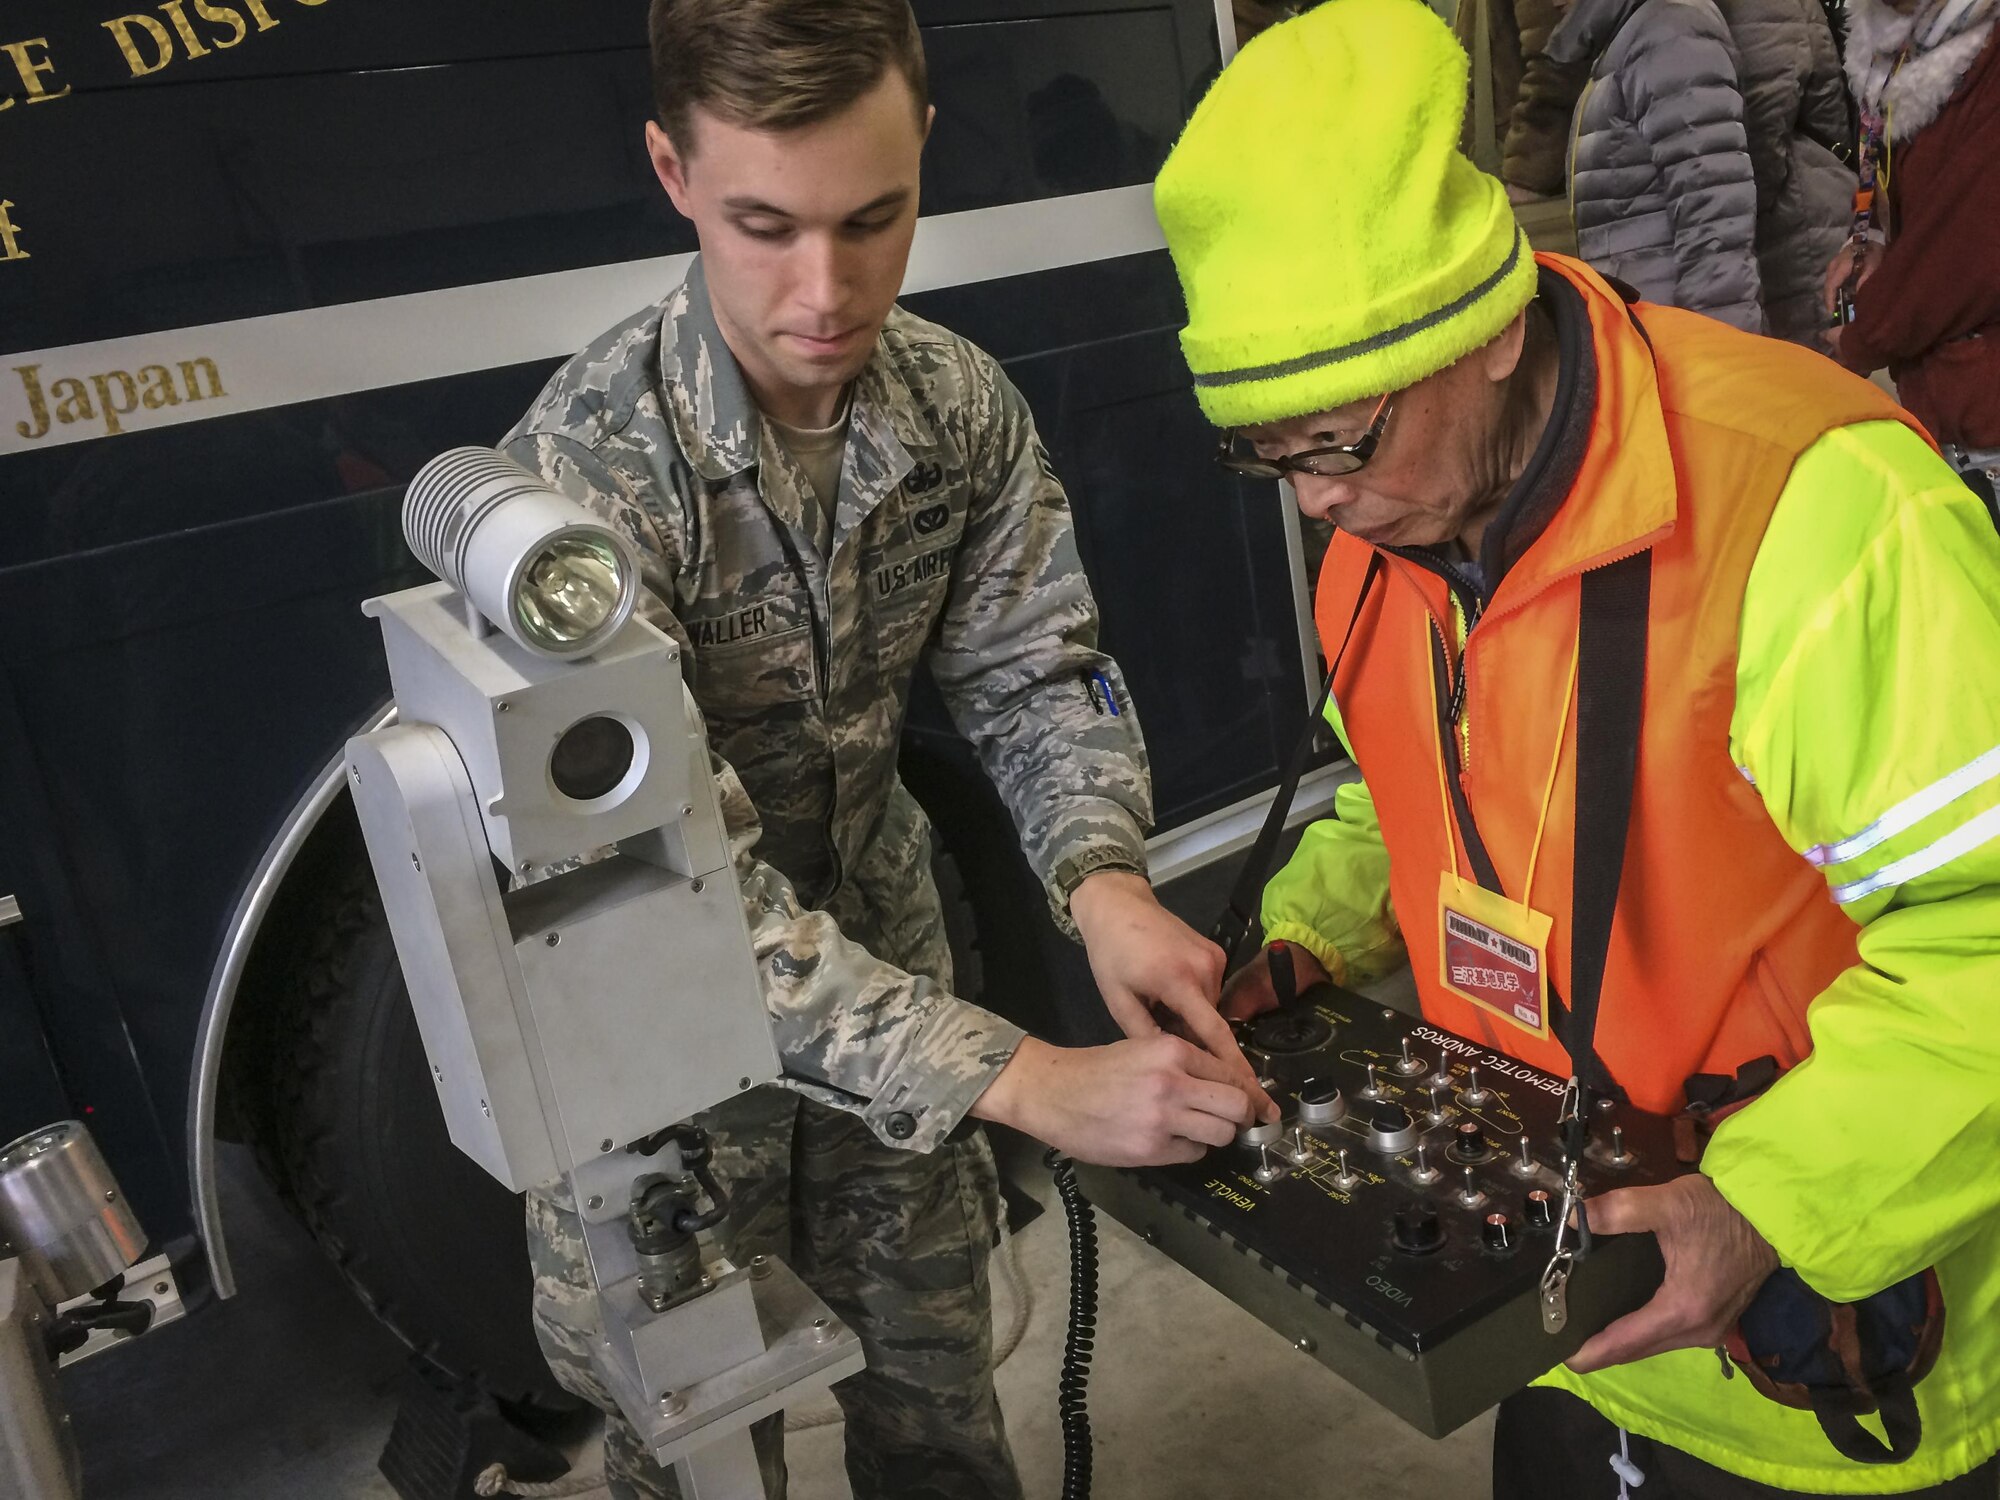 U.S. Air Force Airman 1st Class Christopher Waller, an explosive ordnance disposal apprentice with the 35th Civil Engineer Squadron, shows a Japanese man how to oper-ate the unit’s bomb disposal robot during a community relations tour at Misawa Air Base, Japan, Jan. 20, 2017. The robot helps EOD Airmen at home and downrange dis-pose of bombs without putting human life at risk. The robots, considered unmanned ground vehicles, enter areas inaccessible or too dangerous for people, while providing state-of-the-art technology in reconnaissance. (U.S. Air Force photo by Staff Sgt. Ben-jamin W. Stratton)